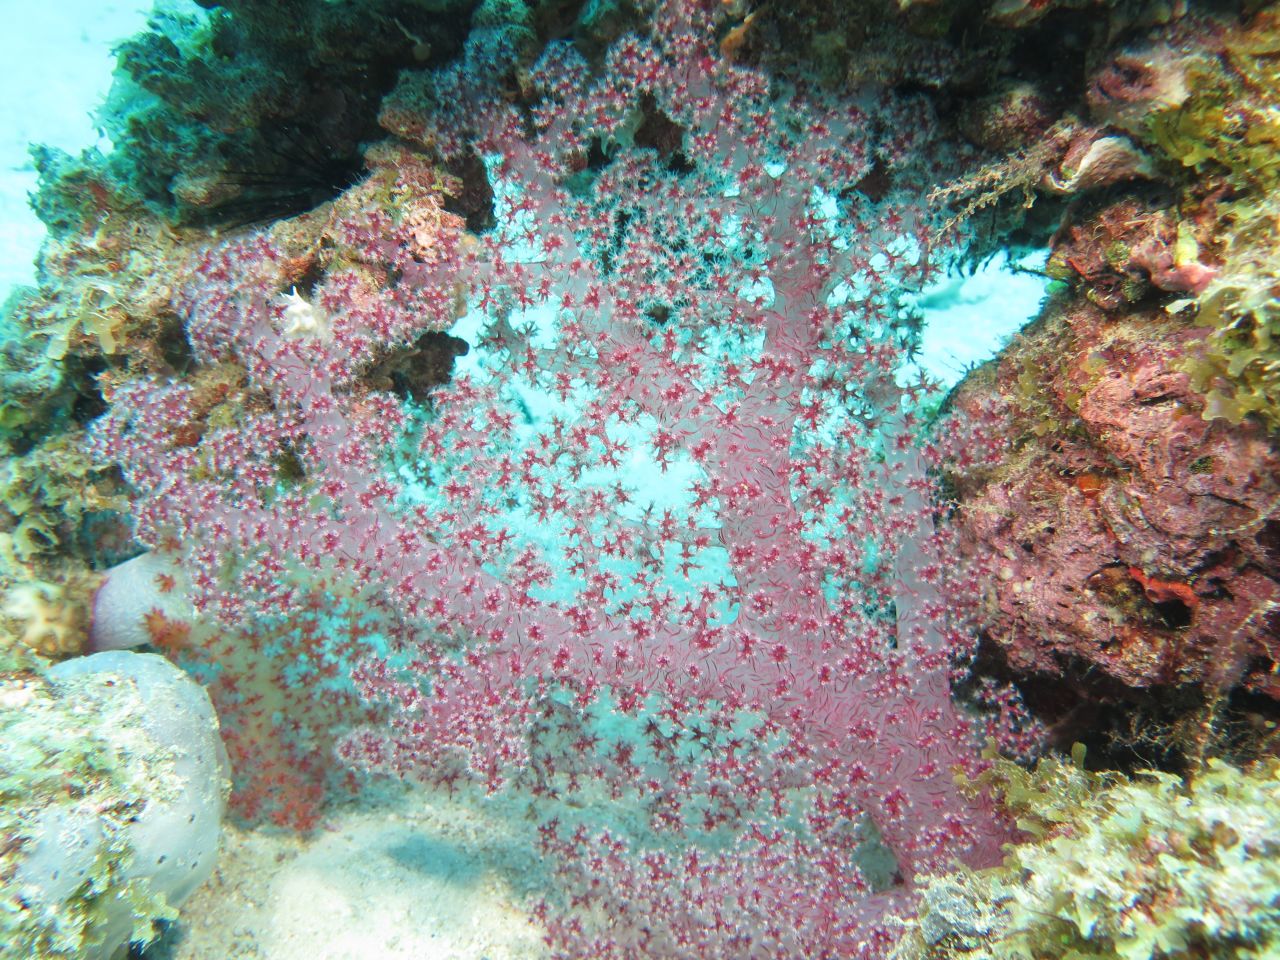 Soft coral.